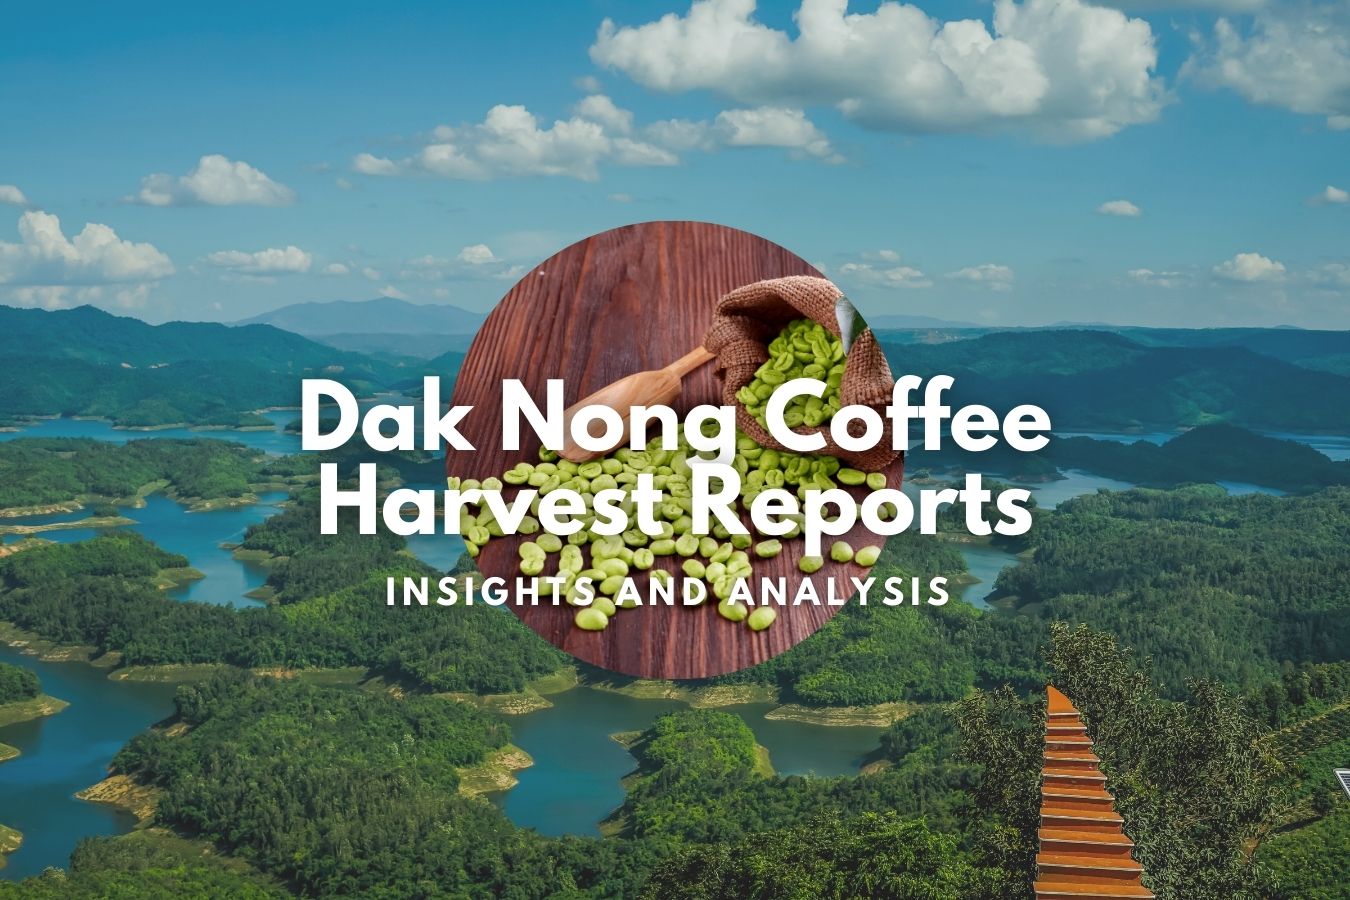 Dak Nong Coffee Harvest Reports Insights and Analysis